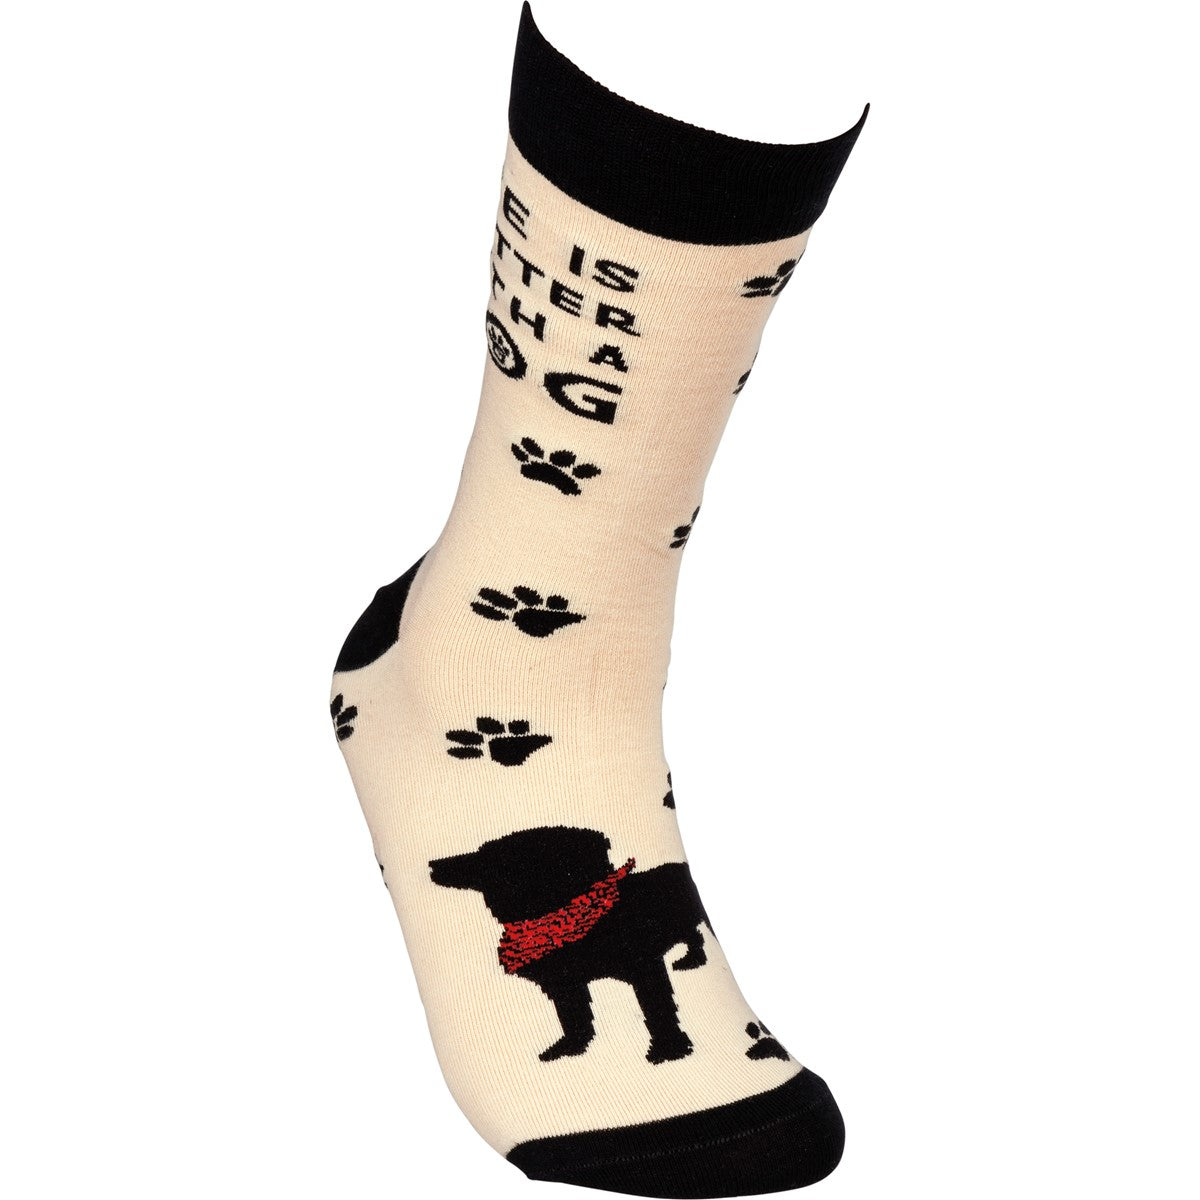 Life Is Better With A Dog Unisex Fun Socks